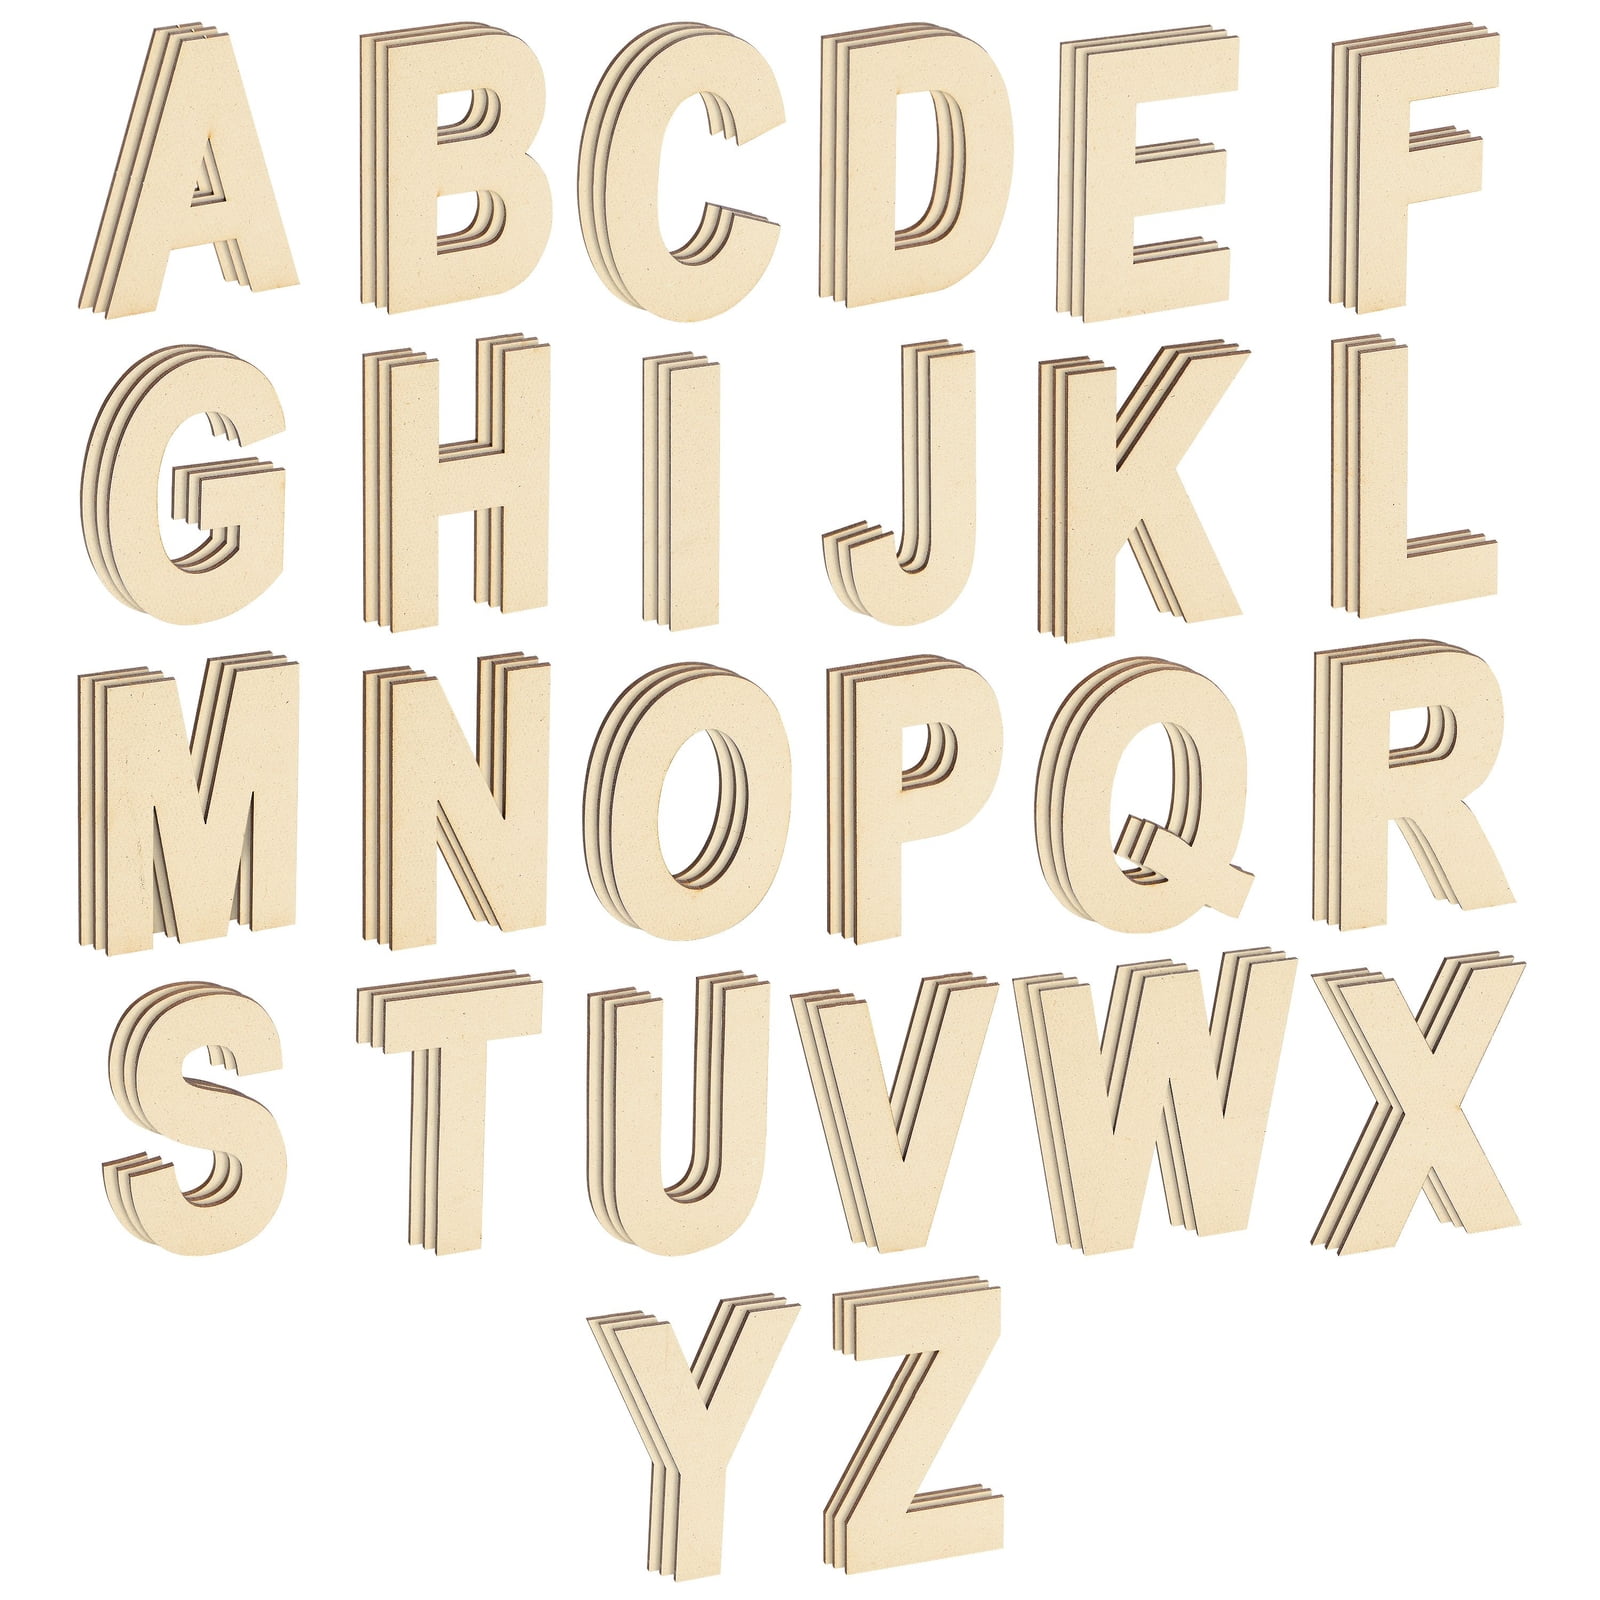 EXCEART 100pcs Pieces Wood Chip Pendant Wood Number Cutouts Hand Decor  Wooden Chips Cardboard Letters Wood Letters 2 Inch Wooden Puzzle Wooden DIY